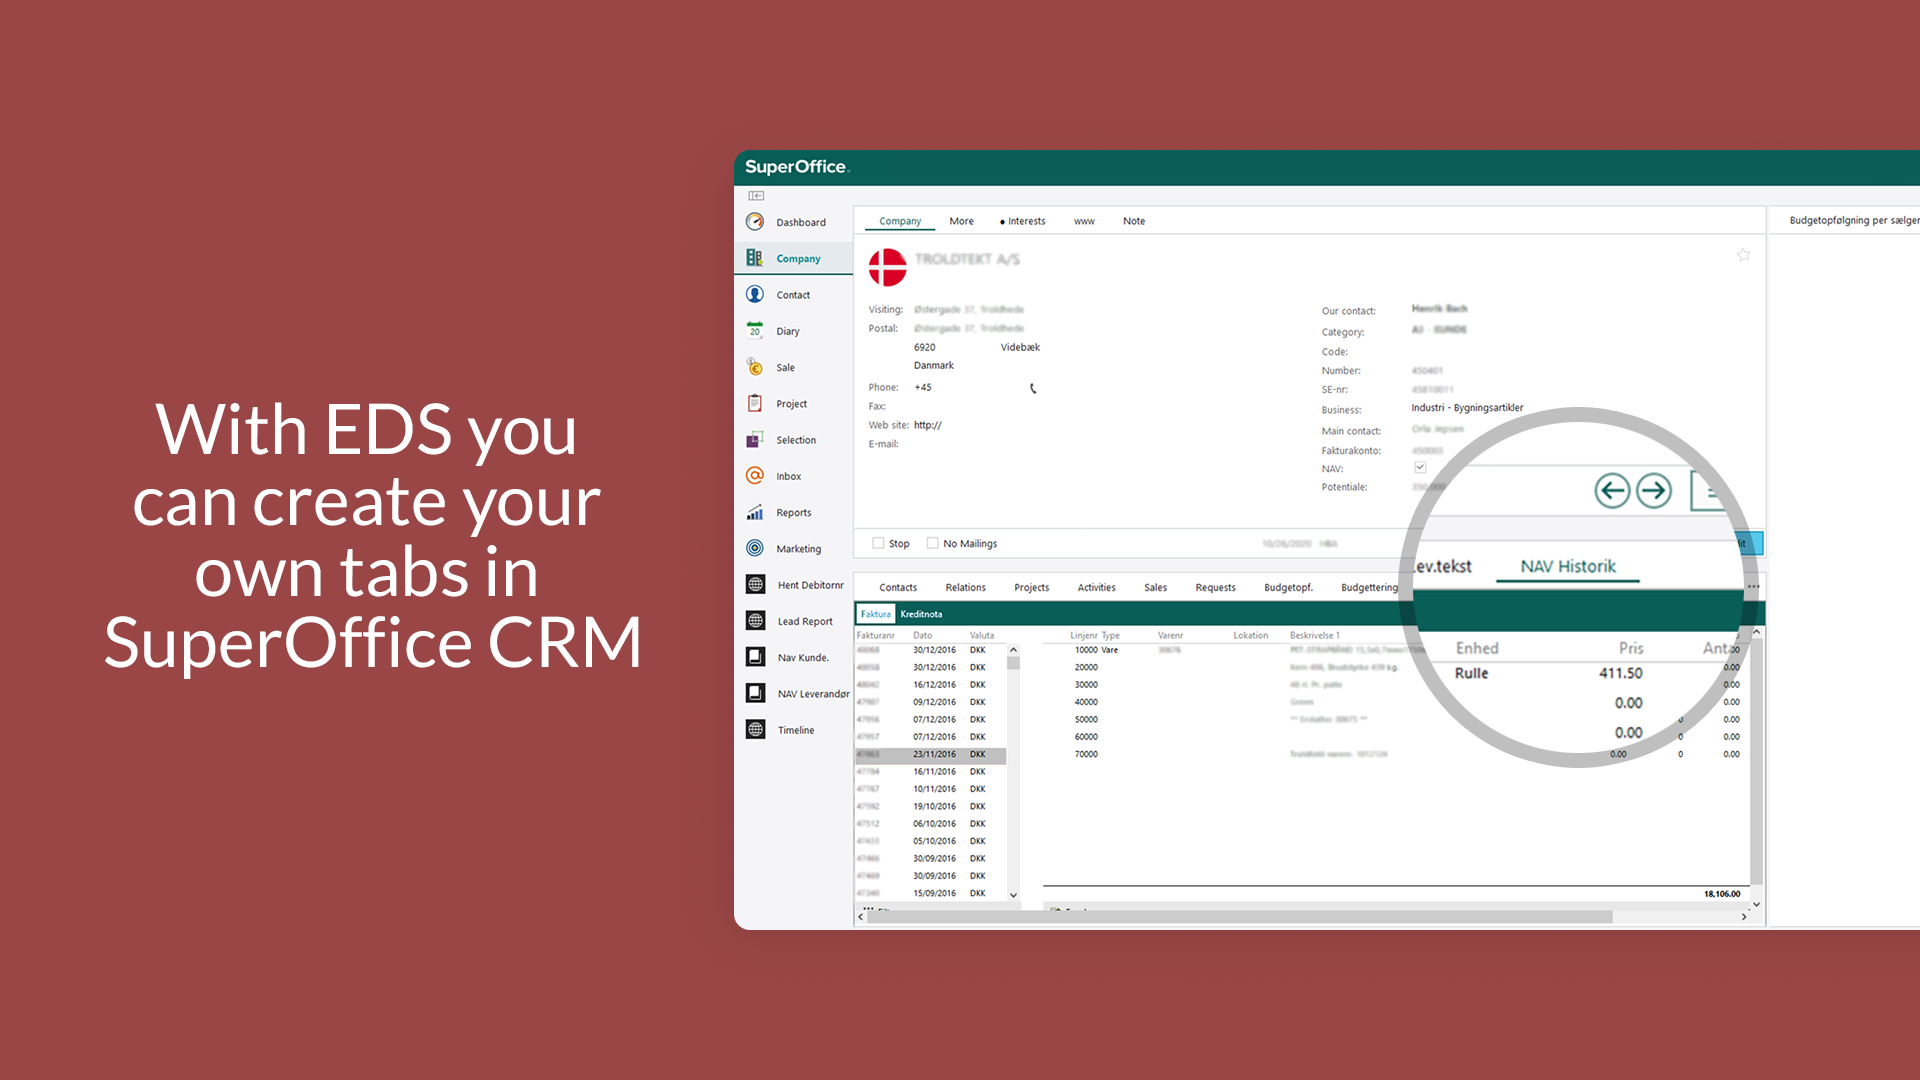 With EDS you can create your own tabs in SuperOffice CRM